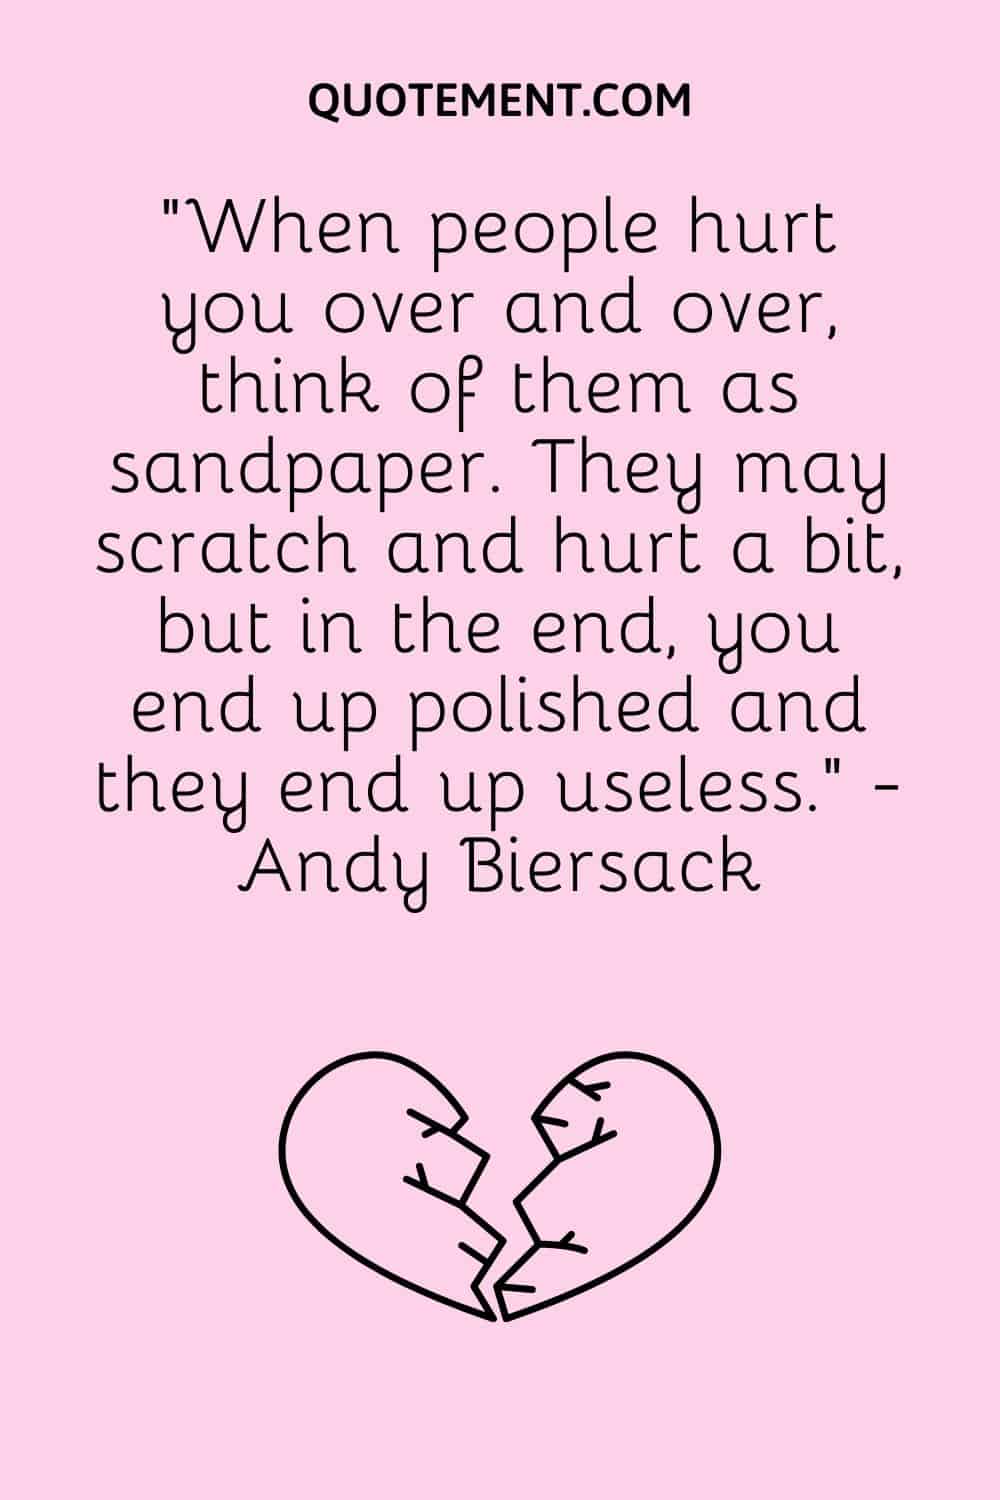 “When people hurt you over and over, think of them as sandpaper. They may scratch and hurt a bit, but in the end, you end up polished and they end up useless.” - Andy Biersack